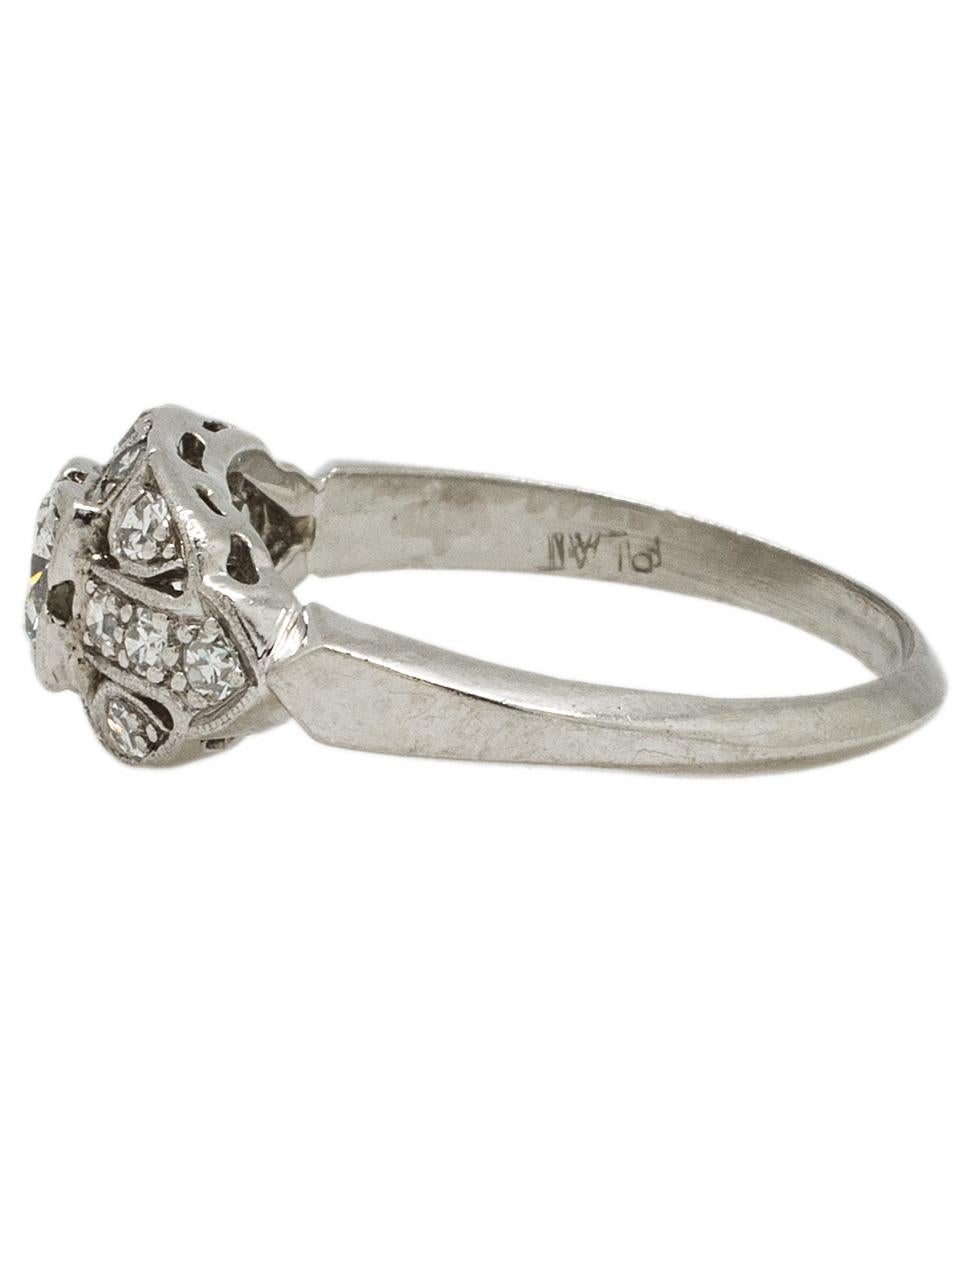 This lovely vintage platinum diamond engagement ring set with 0.50ct round brilliant center, I color-SI2 clarity, is brimming with antique detail. With fourteen bead-set single-cut side diamonds weighing approximately .30ct, this piece is stunning